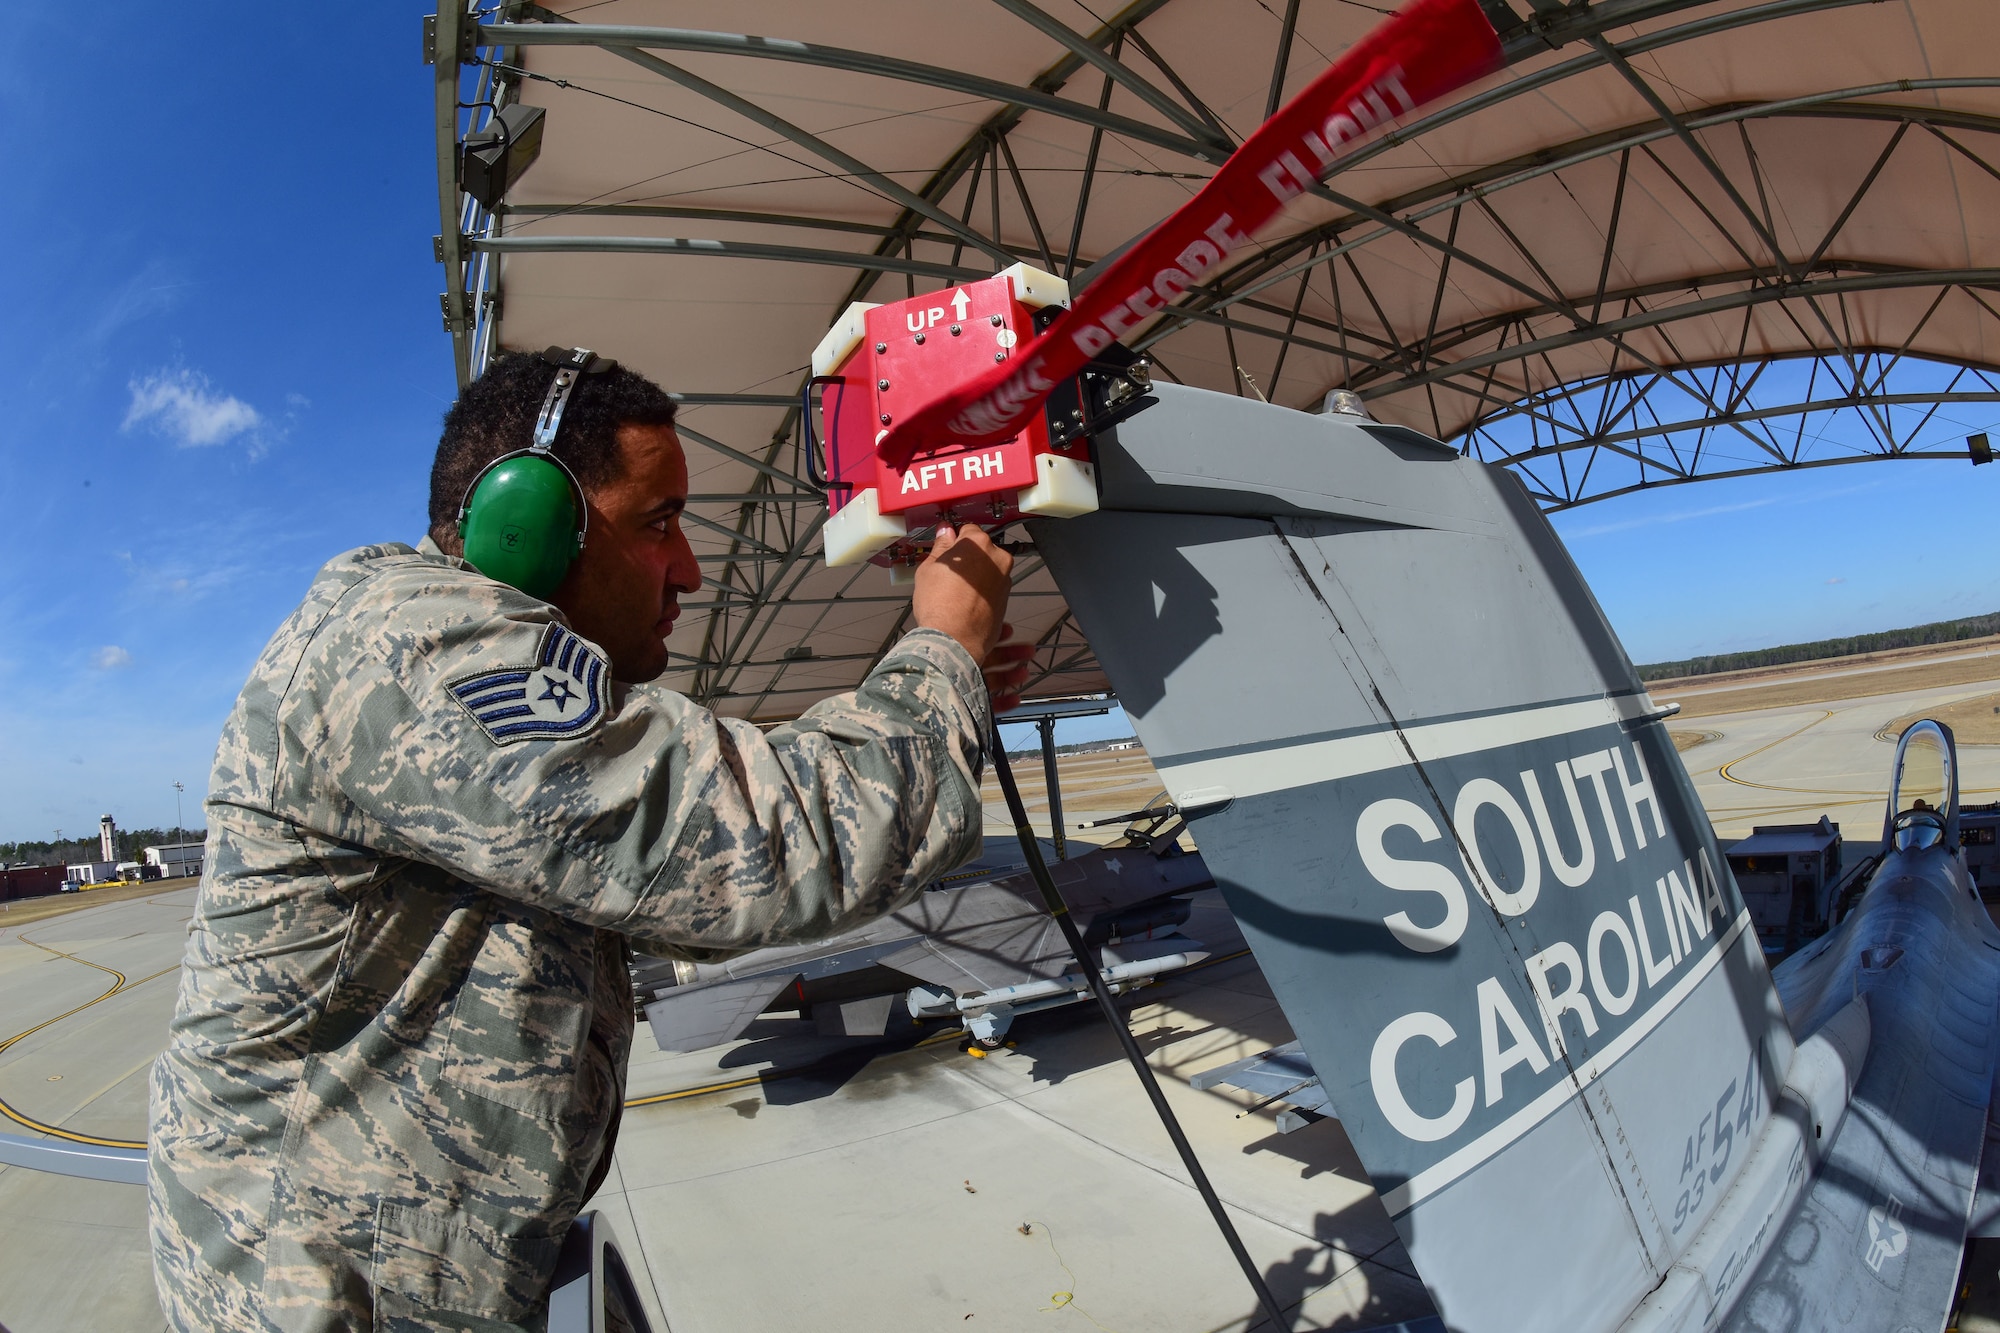 U.S. Air Force Staff Sgt. Allen Greenhill, a Combat Shield inspector from the 16th Electronic Warfare Squadron at Eglin Air Force Base, Fla., attaches a testing device onto an F-16 Fighting Falcon assigned to the South Carolina Air National Guard at McEntire Joint National Guard Base, S.C., Jan. 18, 2017. The South Carolina Air National Guard’s 169th Aircraft Maintenance Squadron’s F-16 Avionics shop received its annual Combat Shield evaluation. Combat Shield evaluates the reliability of the jet’s radar threat warning system, electronic countermeasure, and high-speed anti-radiation missile targeting system pods. Each component is crucial to the success of the F-16 fighter pilot in combat situations.  (U.S. Air National Guard photo by Airman 1st Class Megan Floyd)